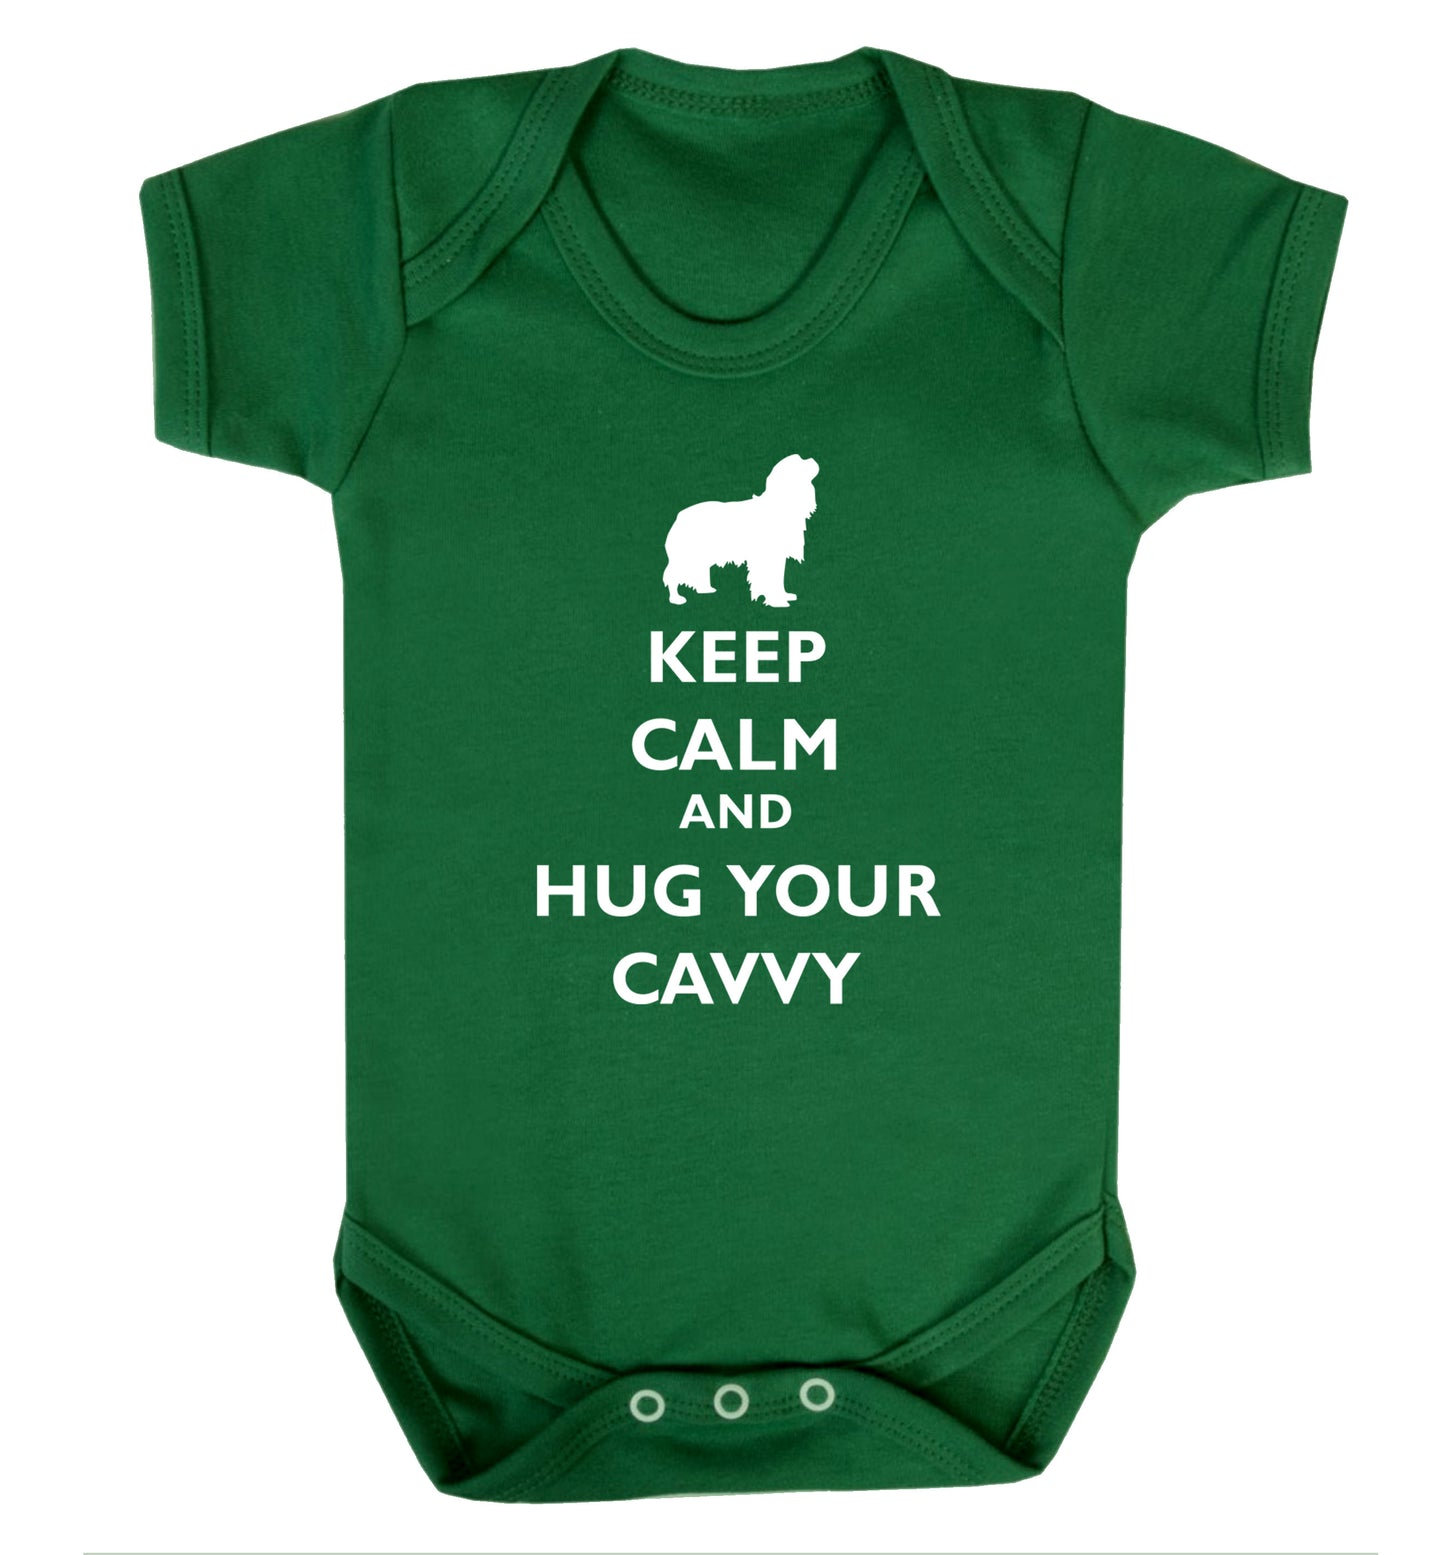 Keep calm and hug your cavvy Baby Vest green 18-24 months